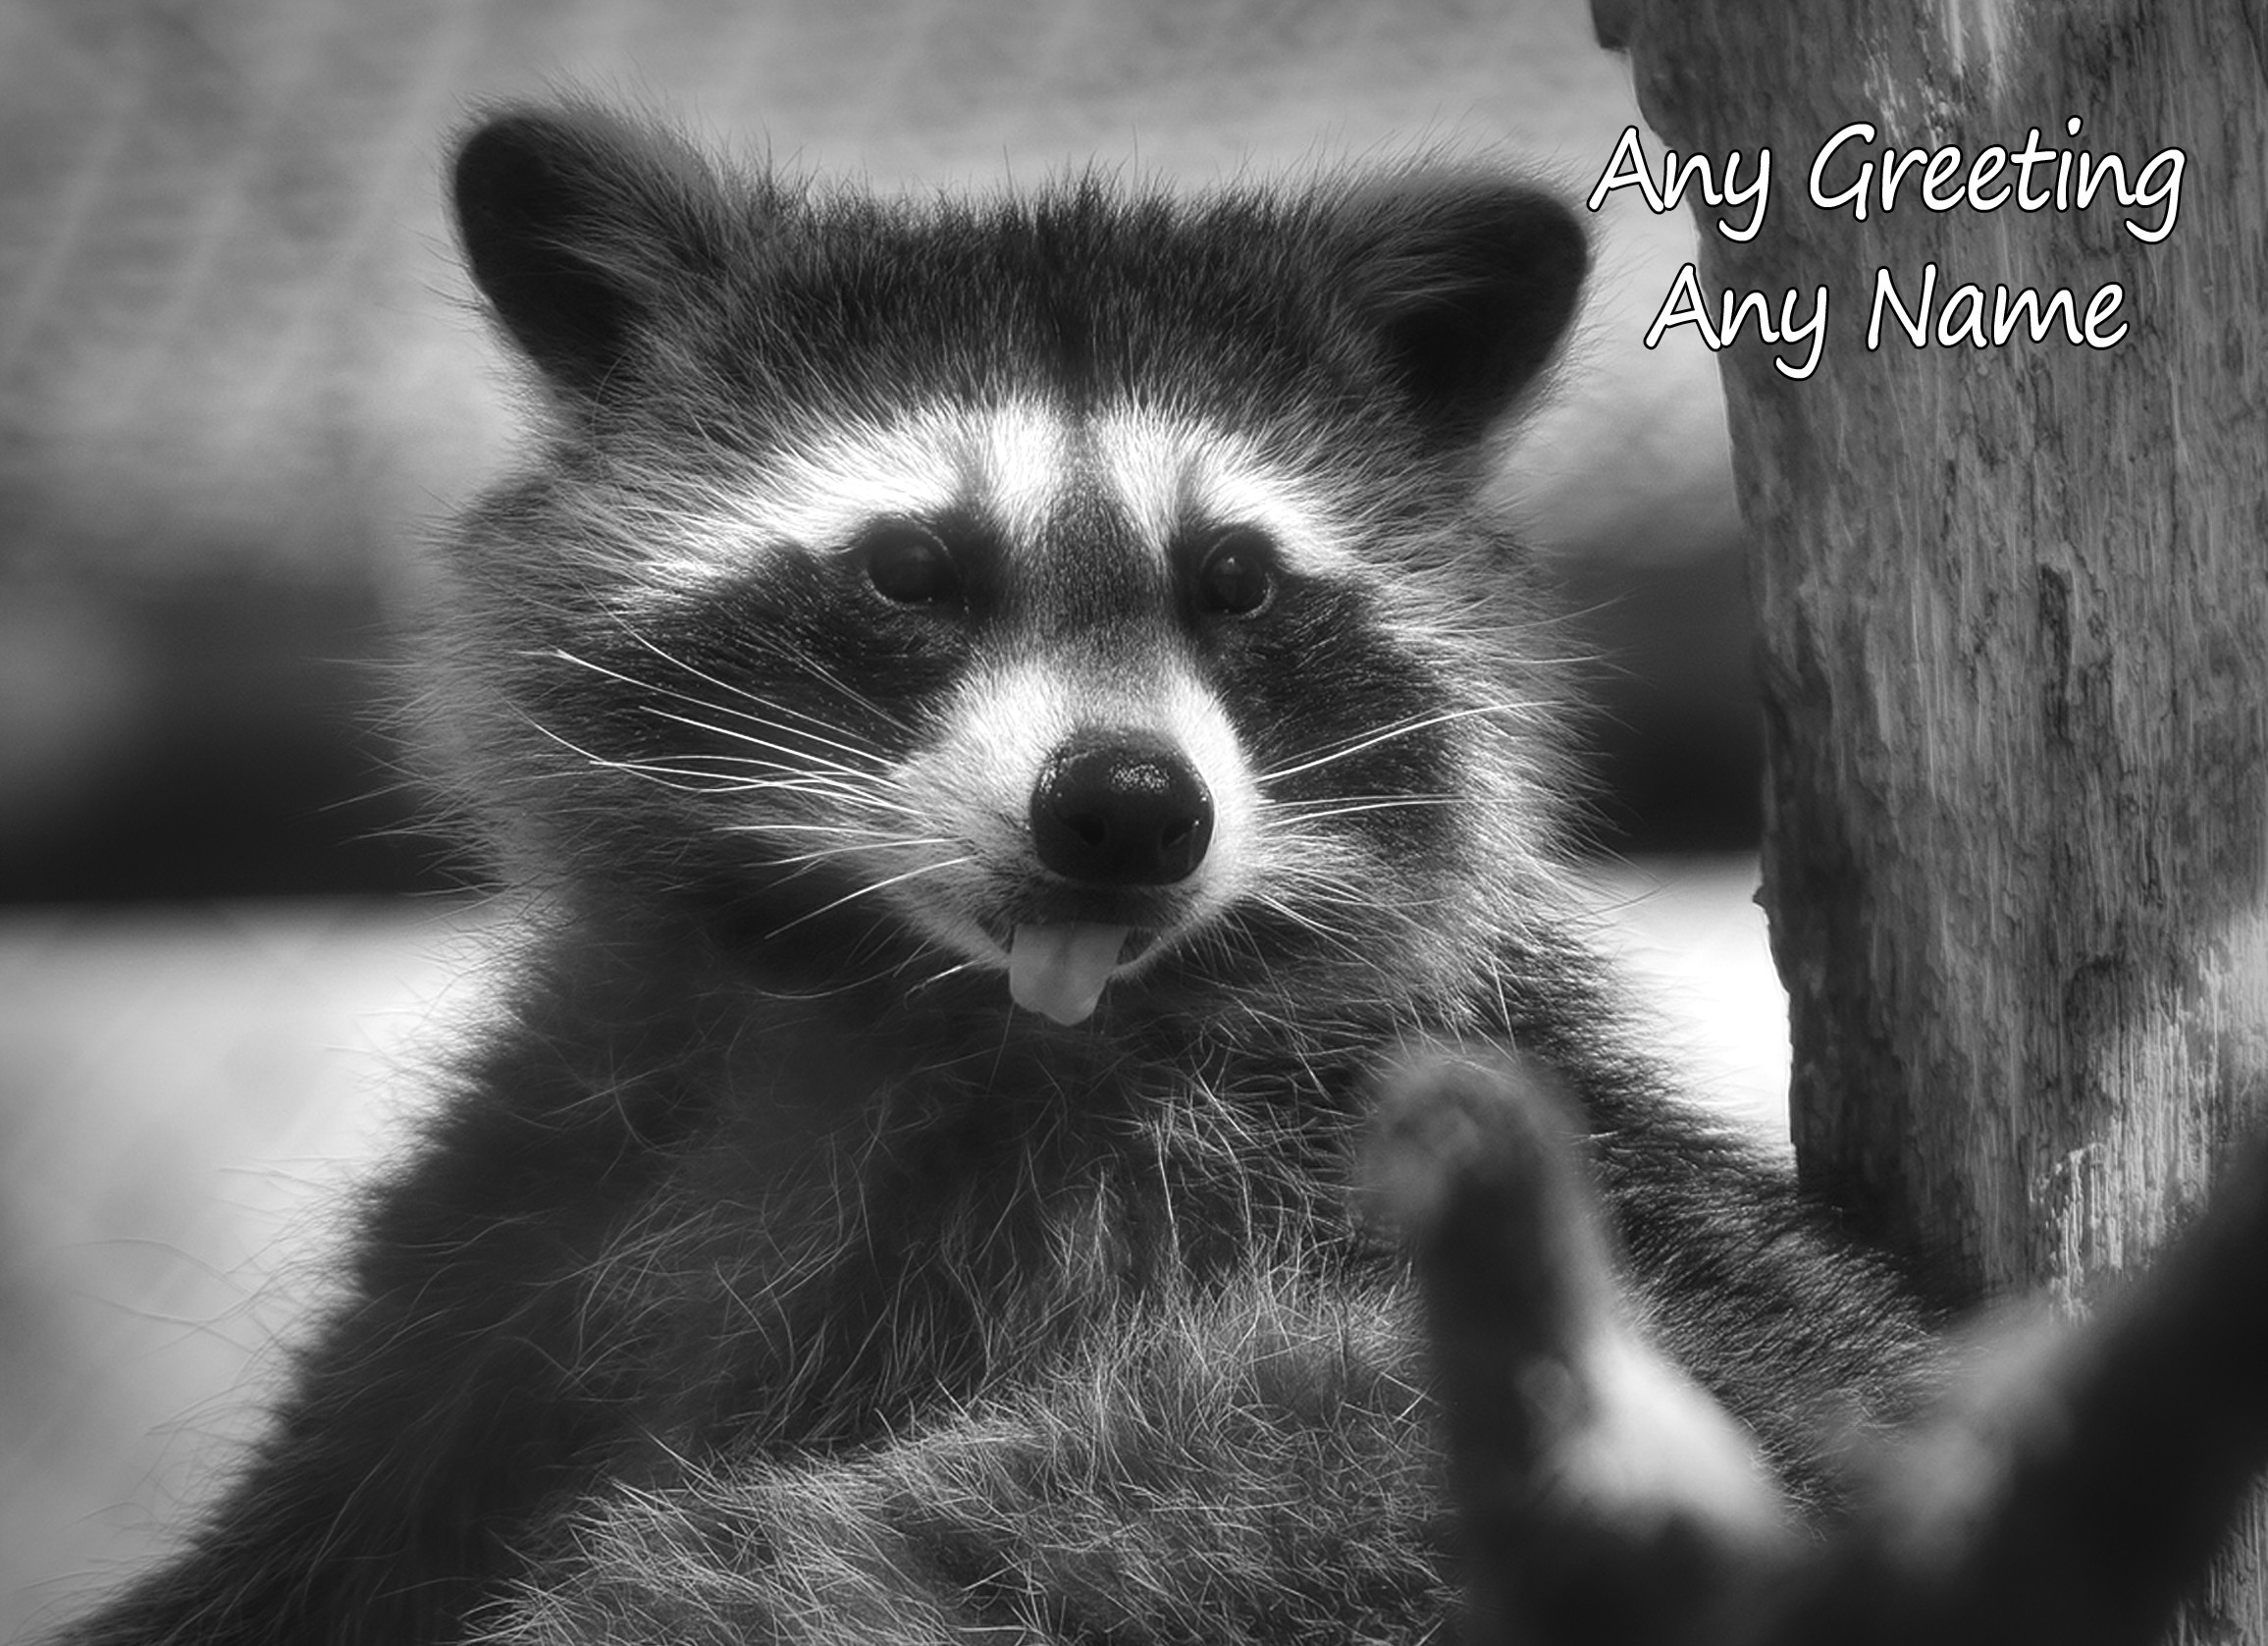 Personalised Raccoon Black and White Greeting Card (Birthday, Christmas, Any Occasion)